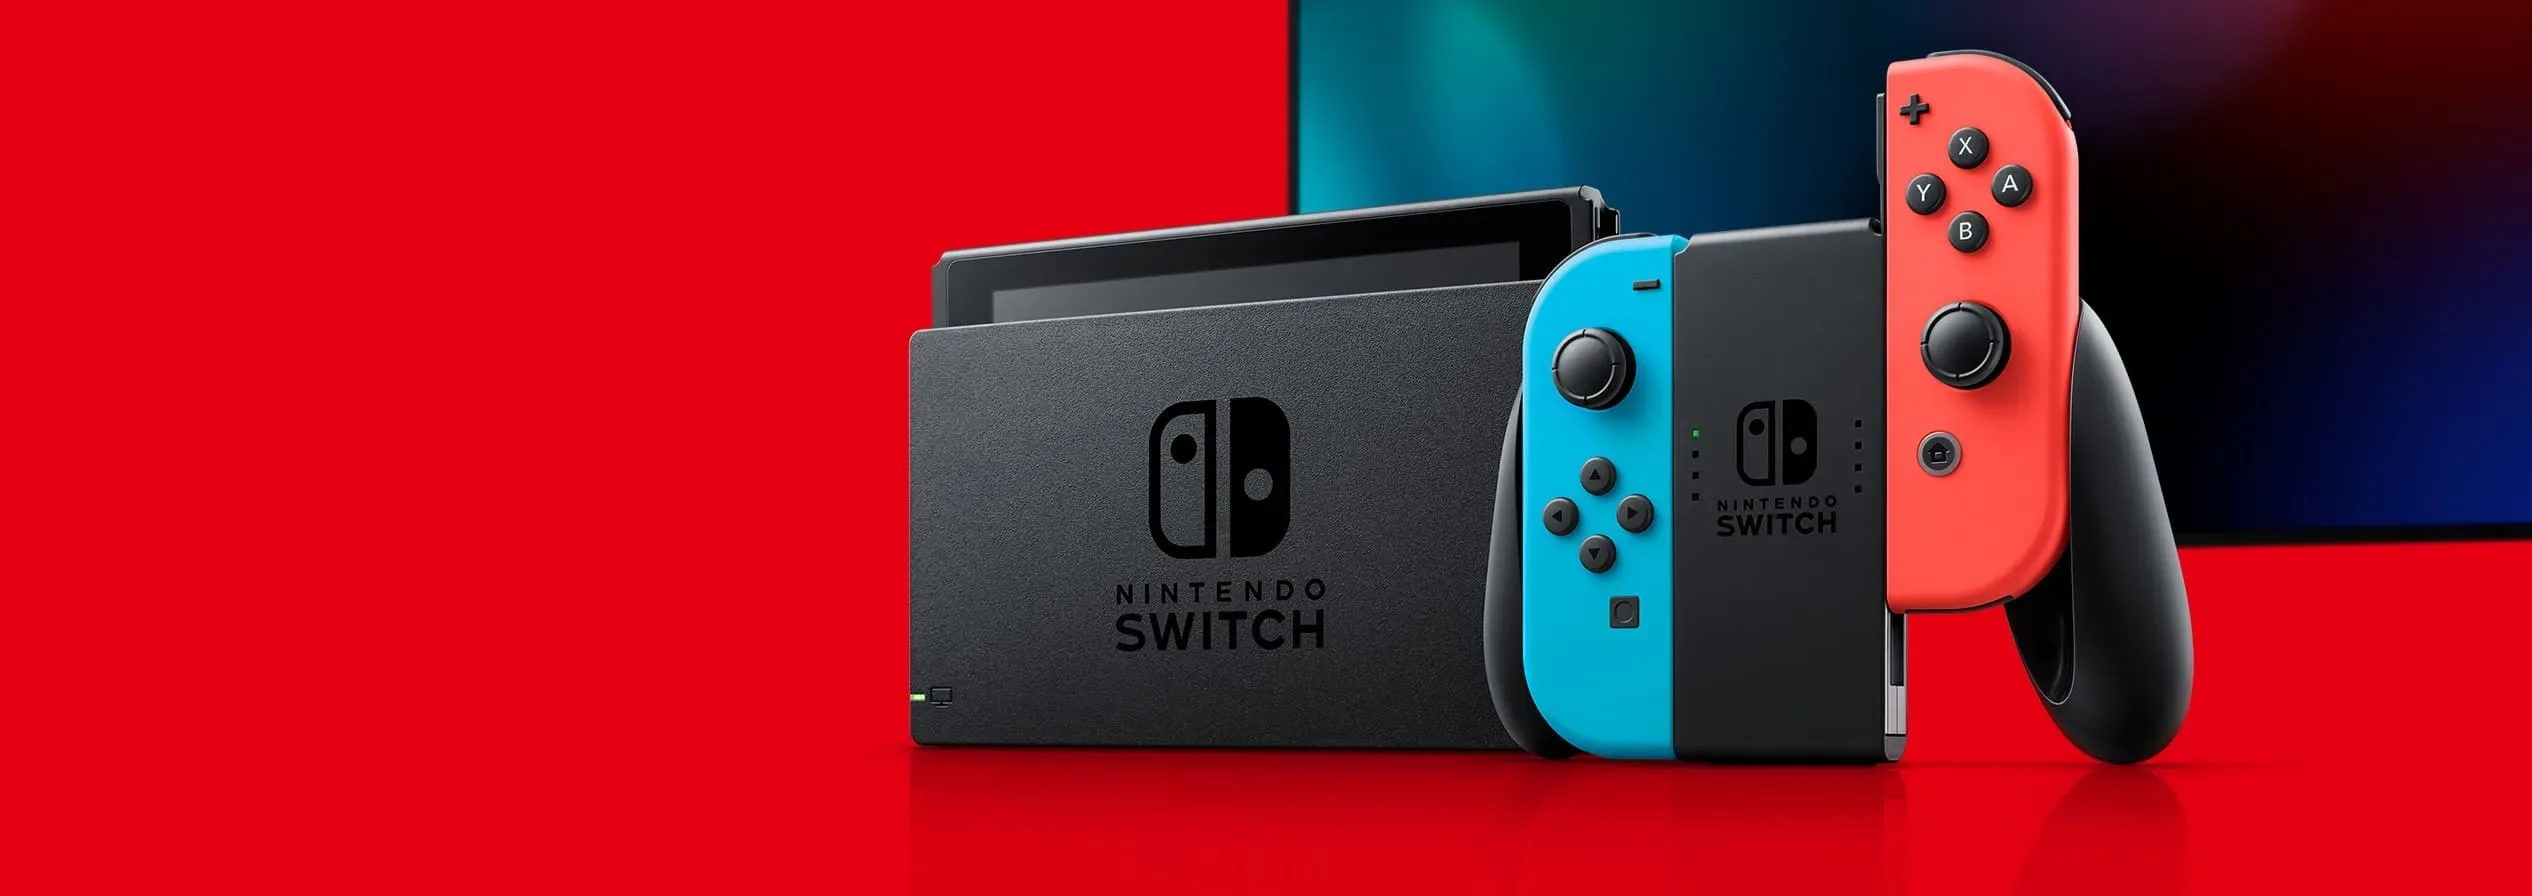 Nintendo Switch is The Best Selling Console During Last Week